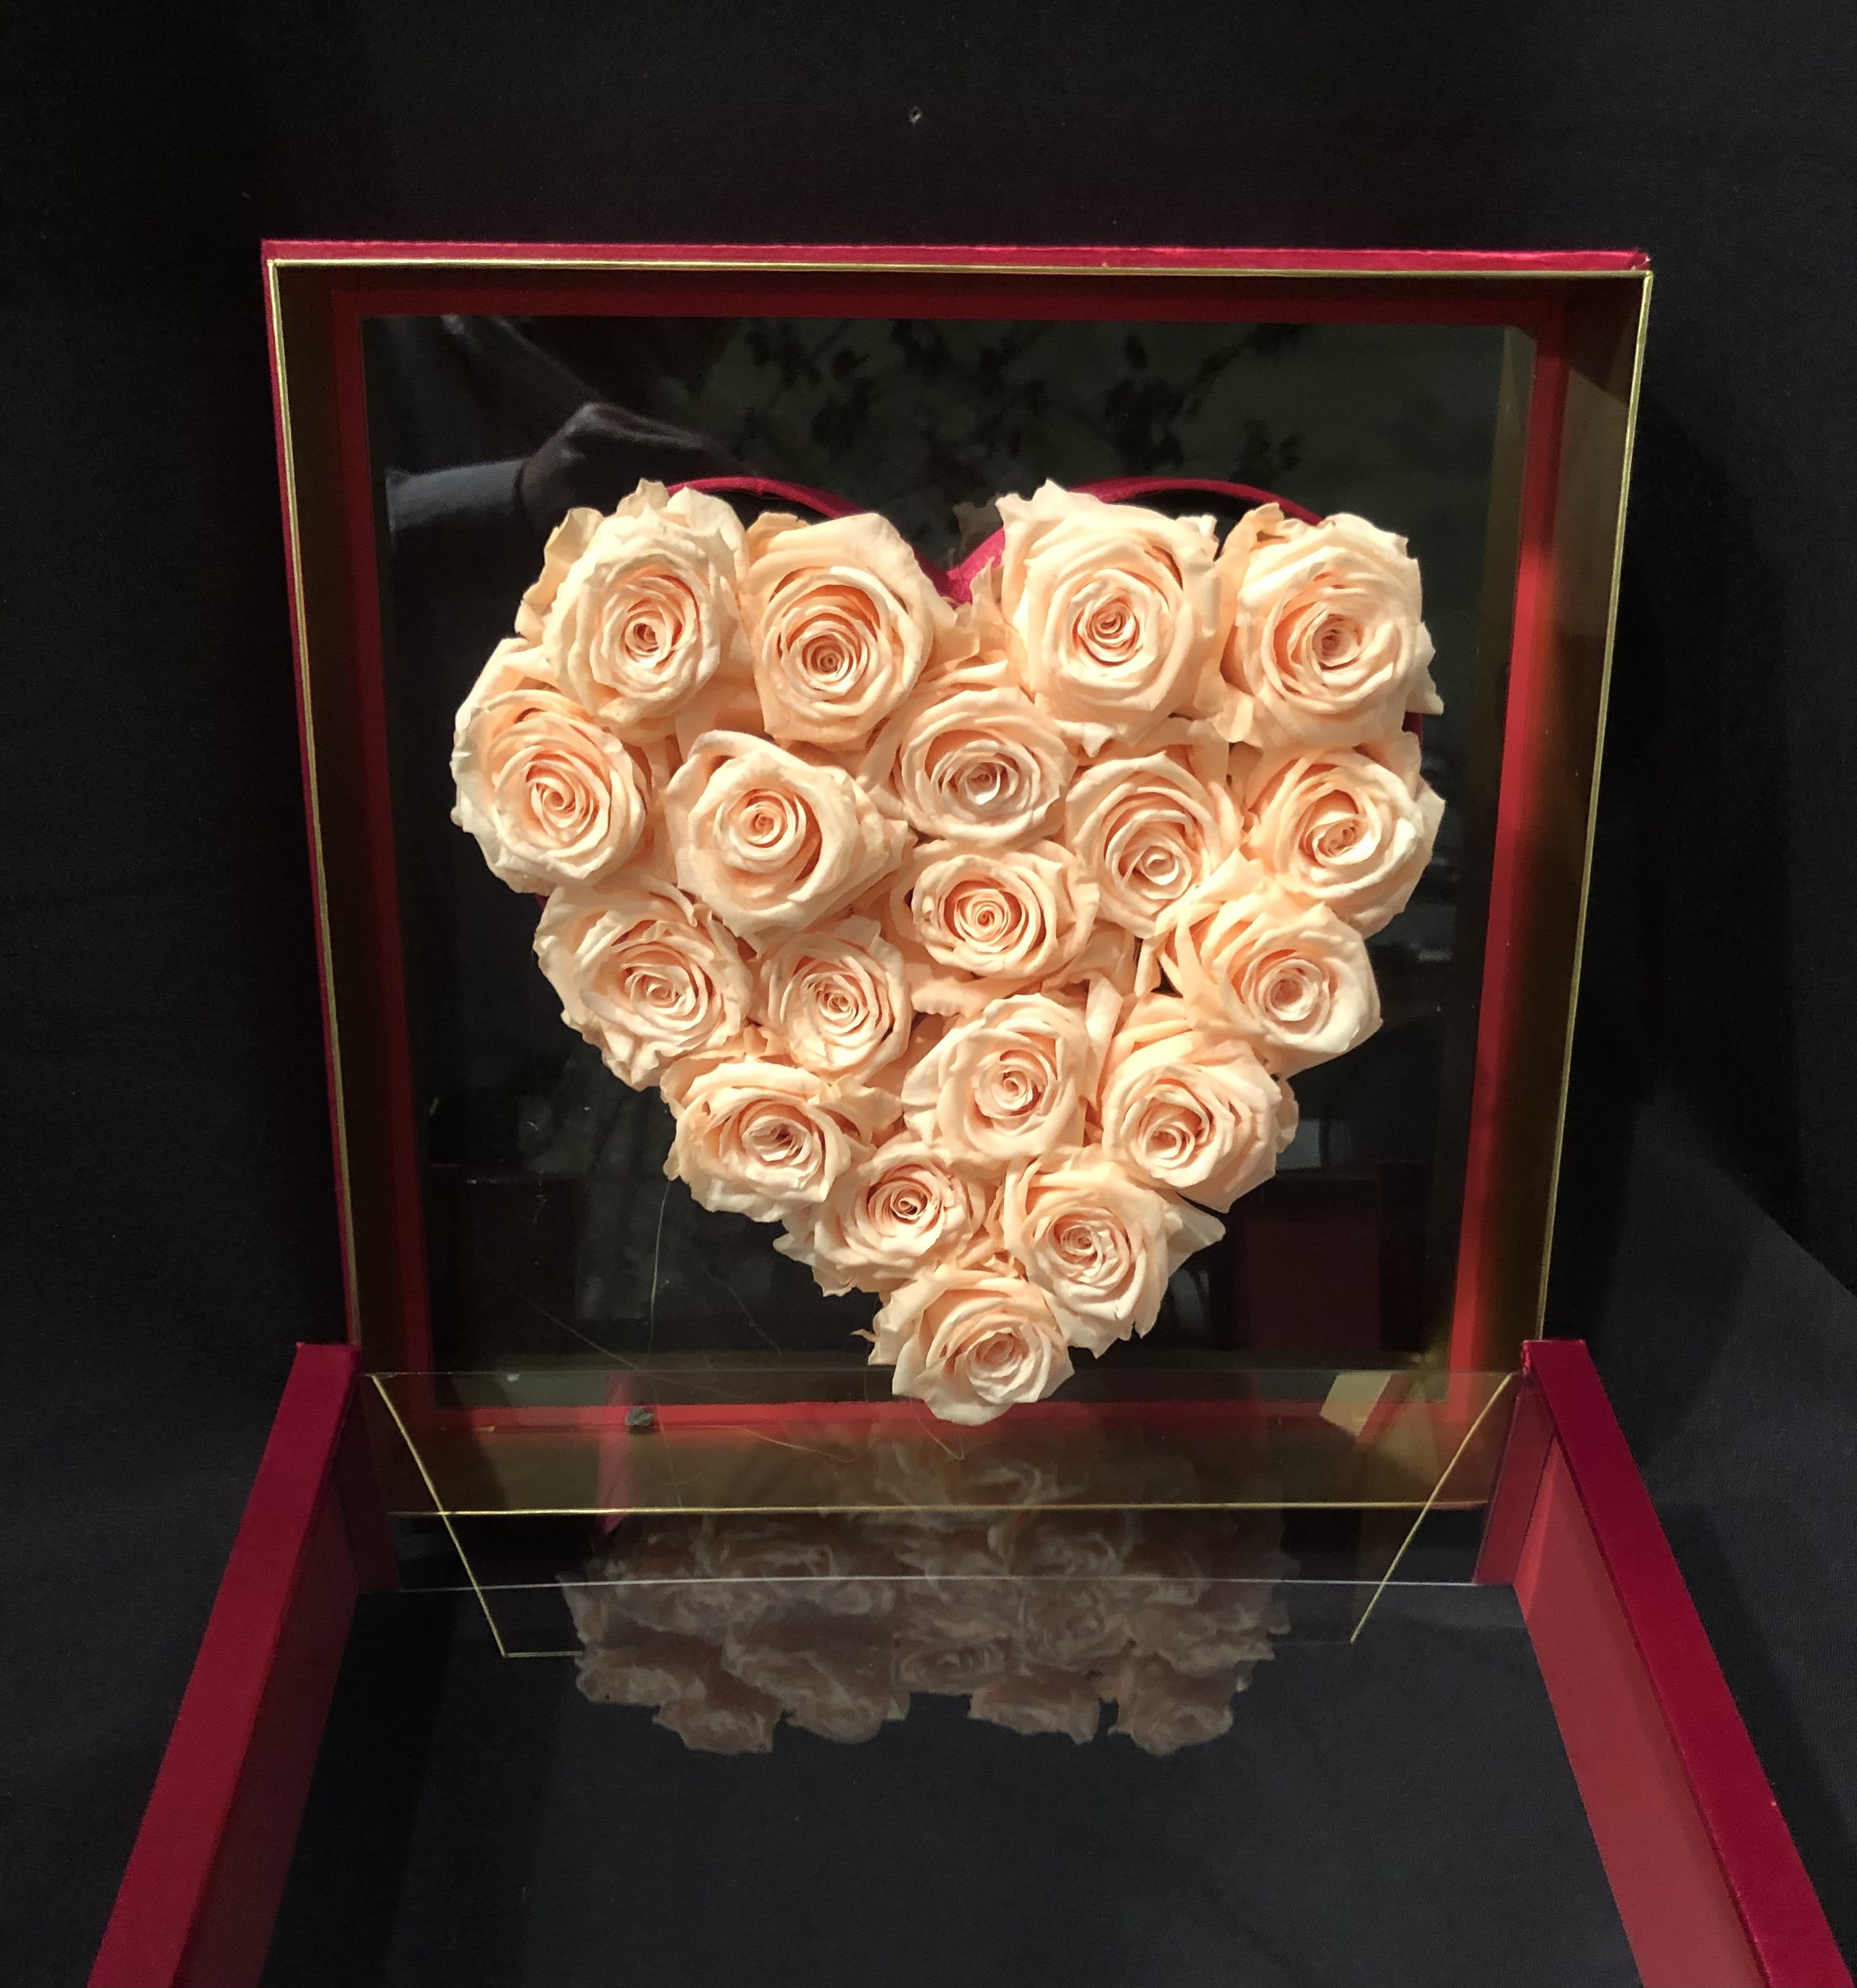 Heart of roses in the box #Dry2 - 20-24 real roses dried and preserved, displayed in a especially made plexiglass box to enjoy for years to come. In your color choice, 3 days notice needed.